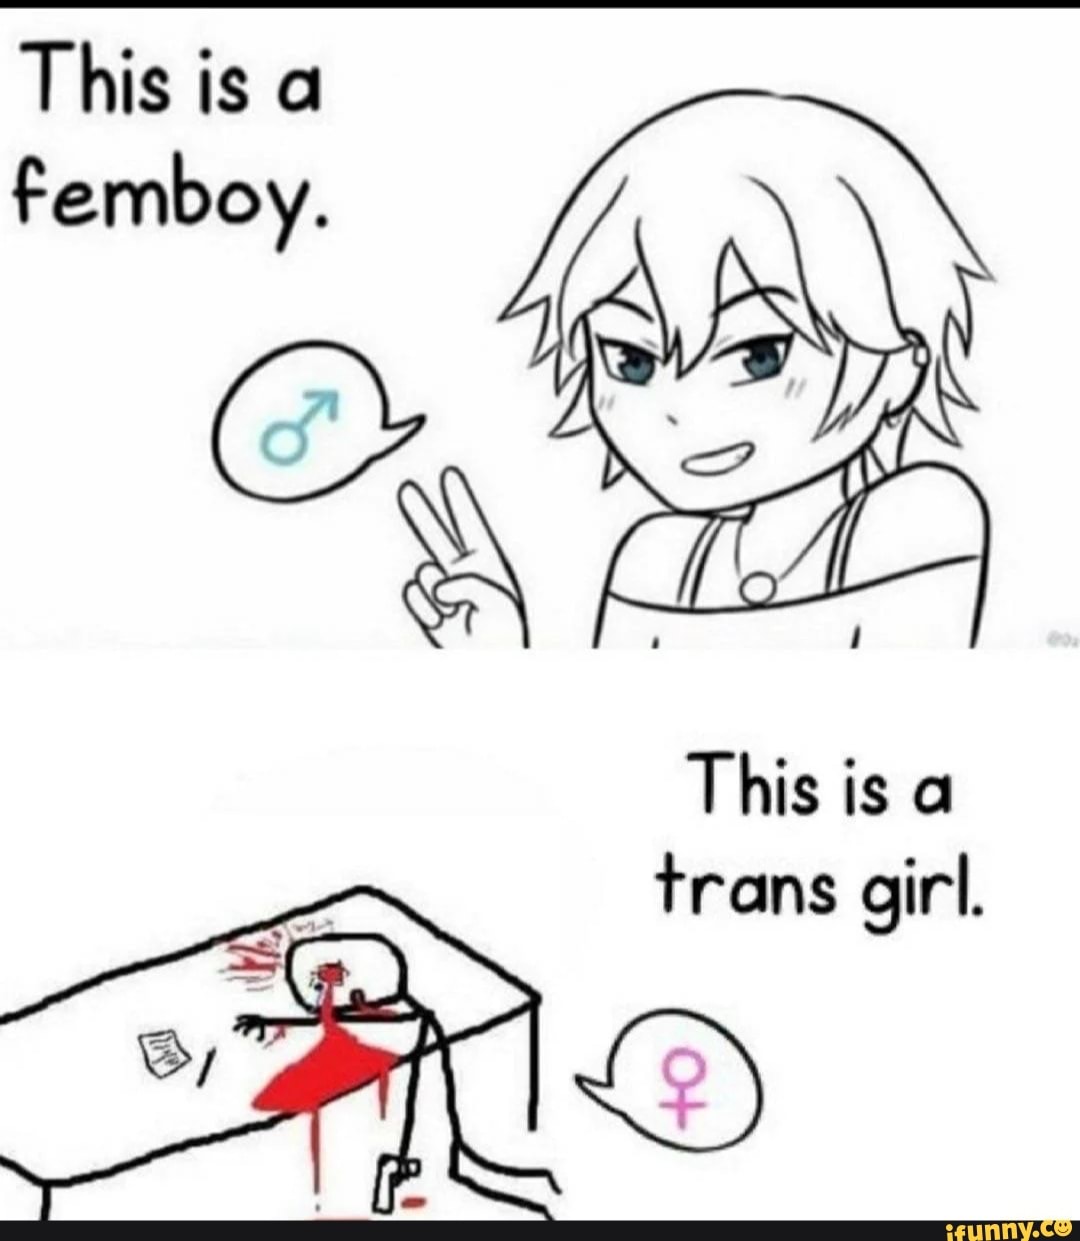 Femboy. This is a trans girl. - iFunny Brazil